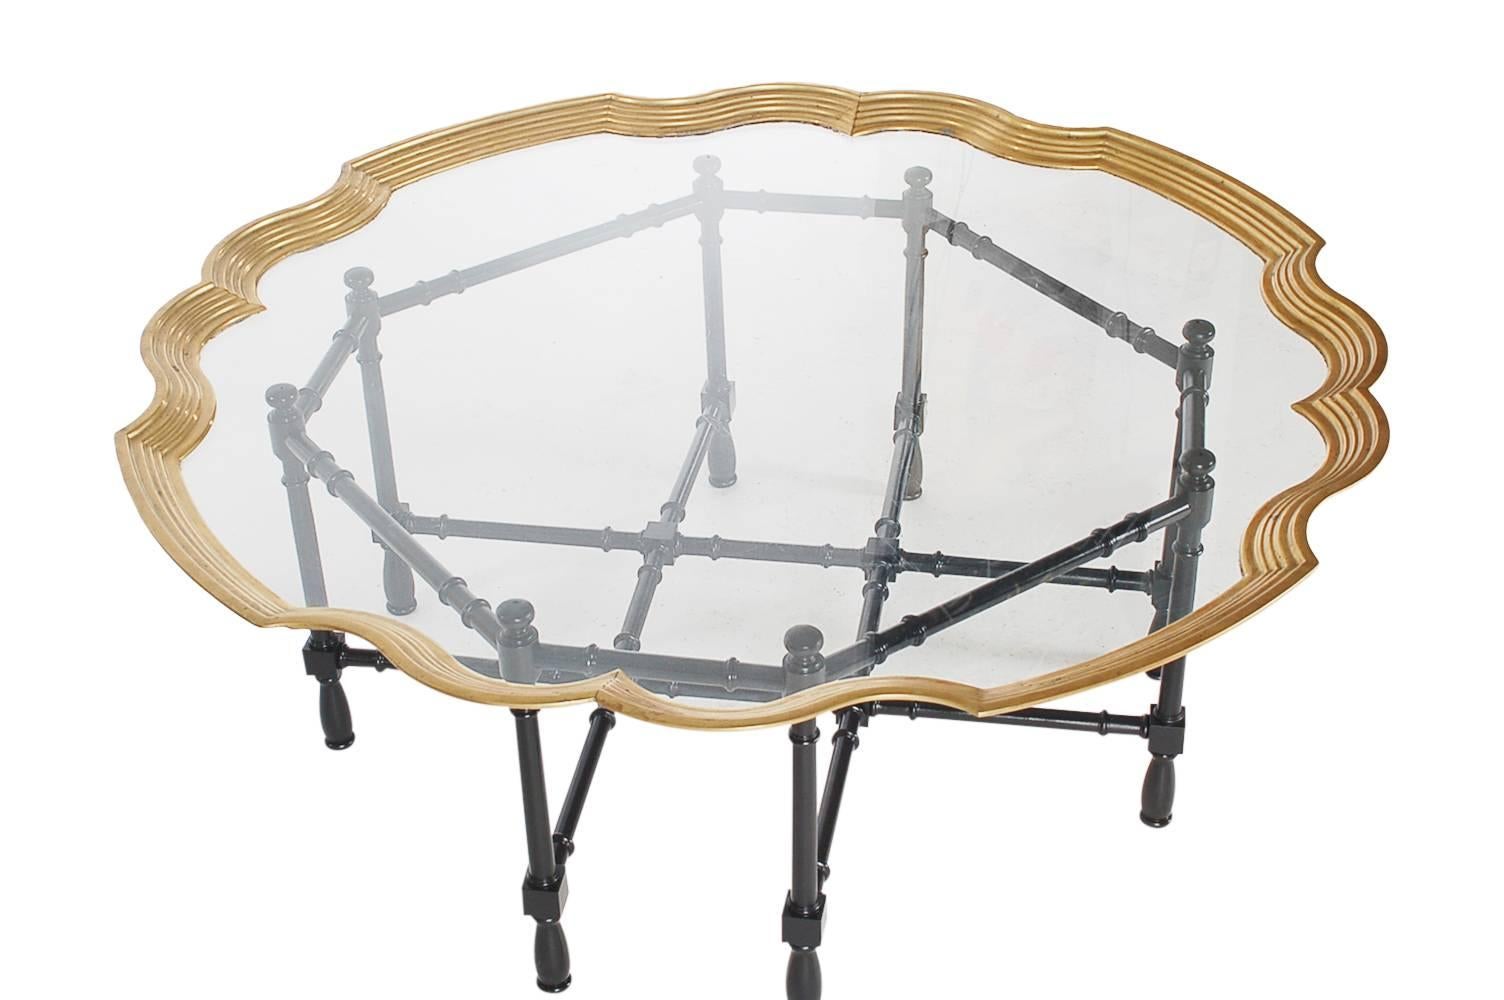 American Hollywood Regency Faux Bamboo, Brass and Glass Cocktail Table, Asian Modern